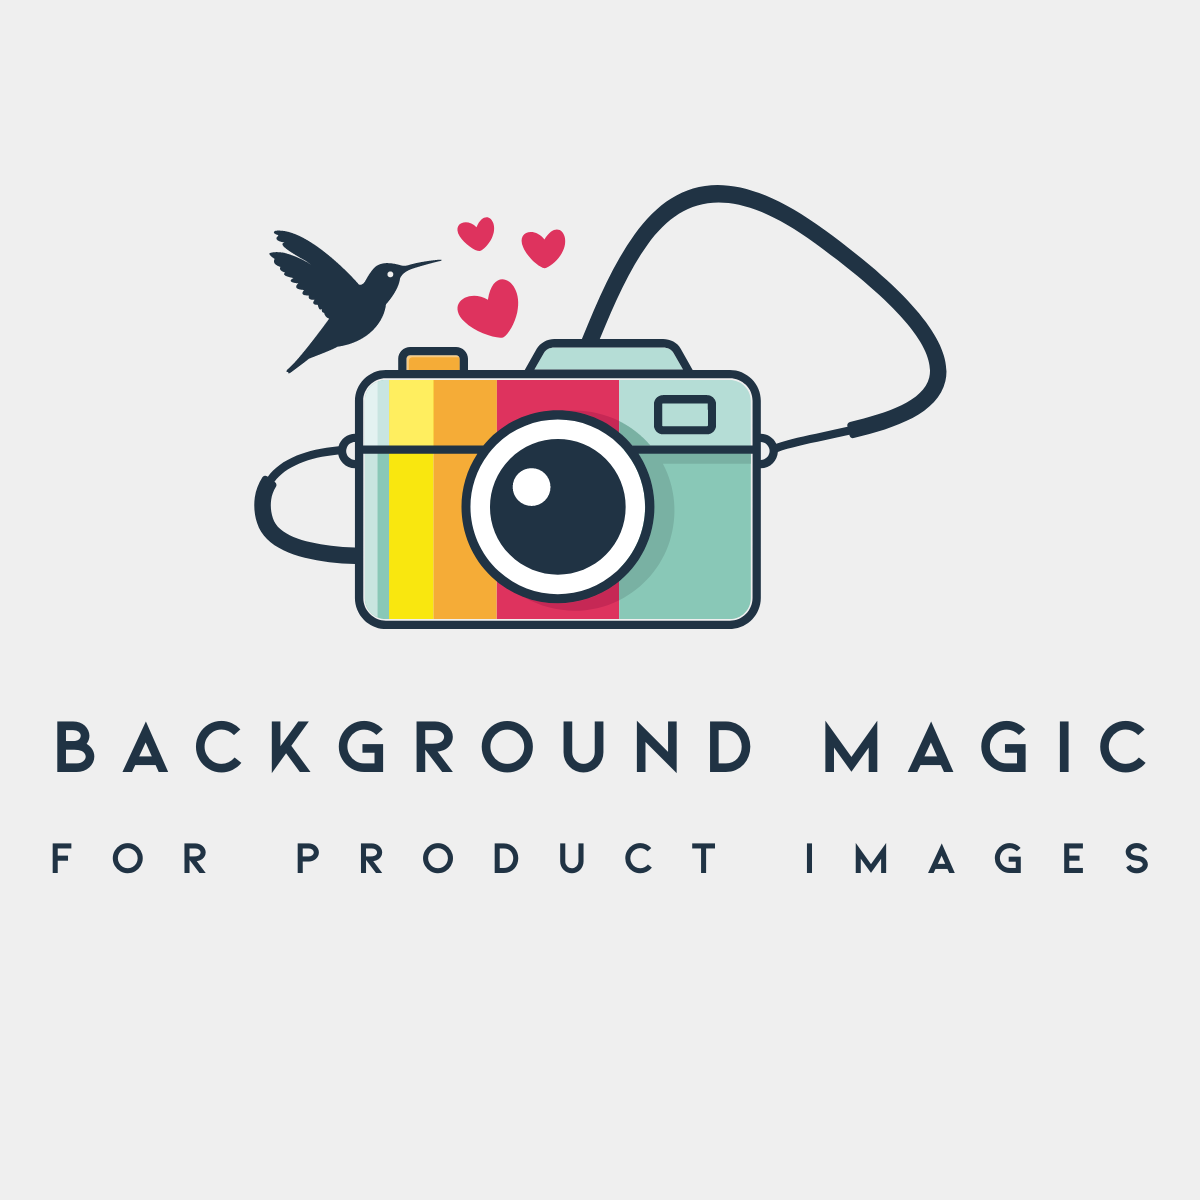 BackgroundMagic for Products